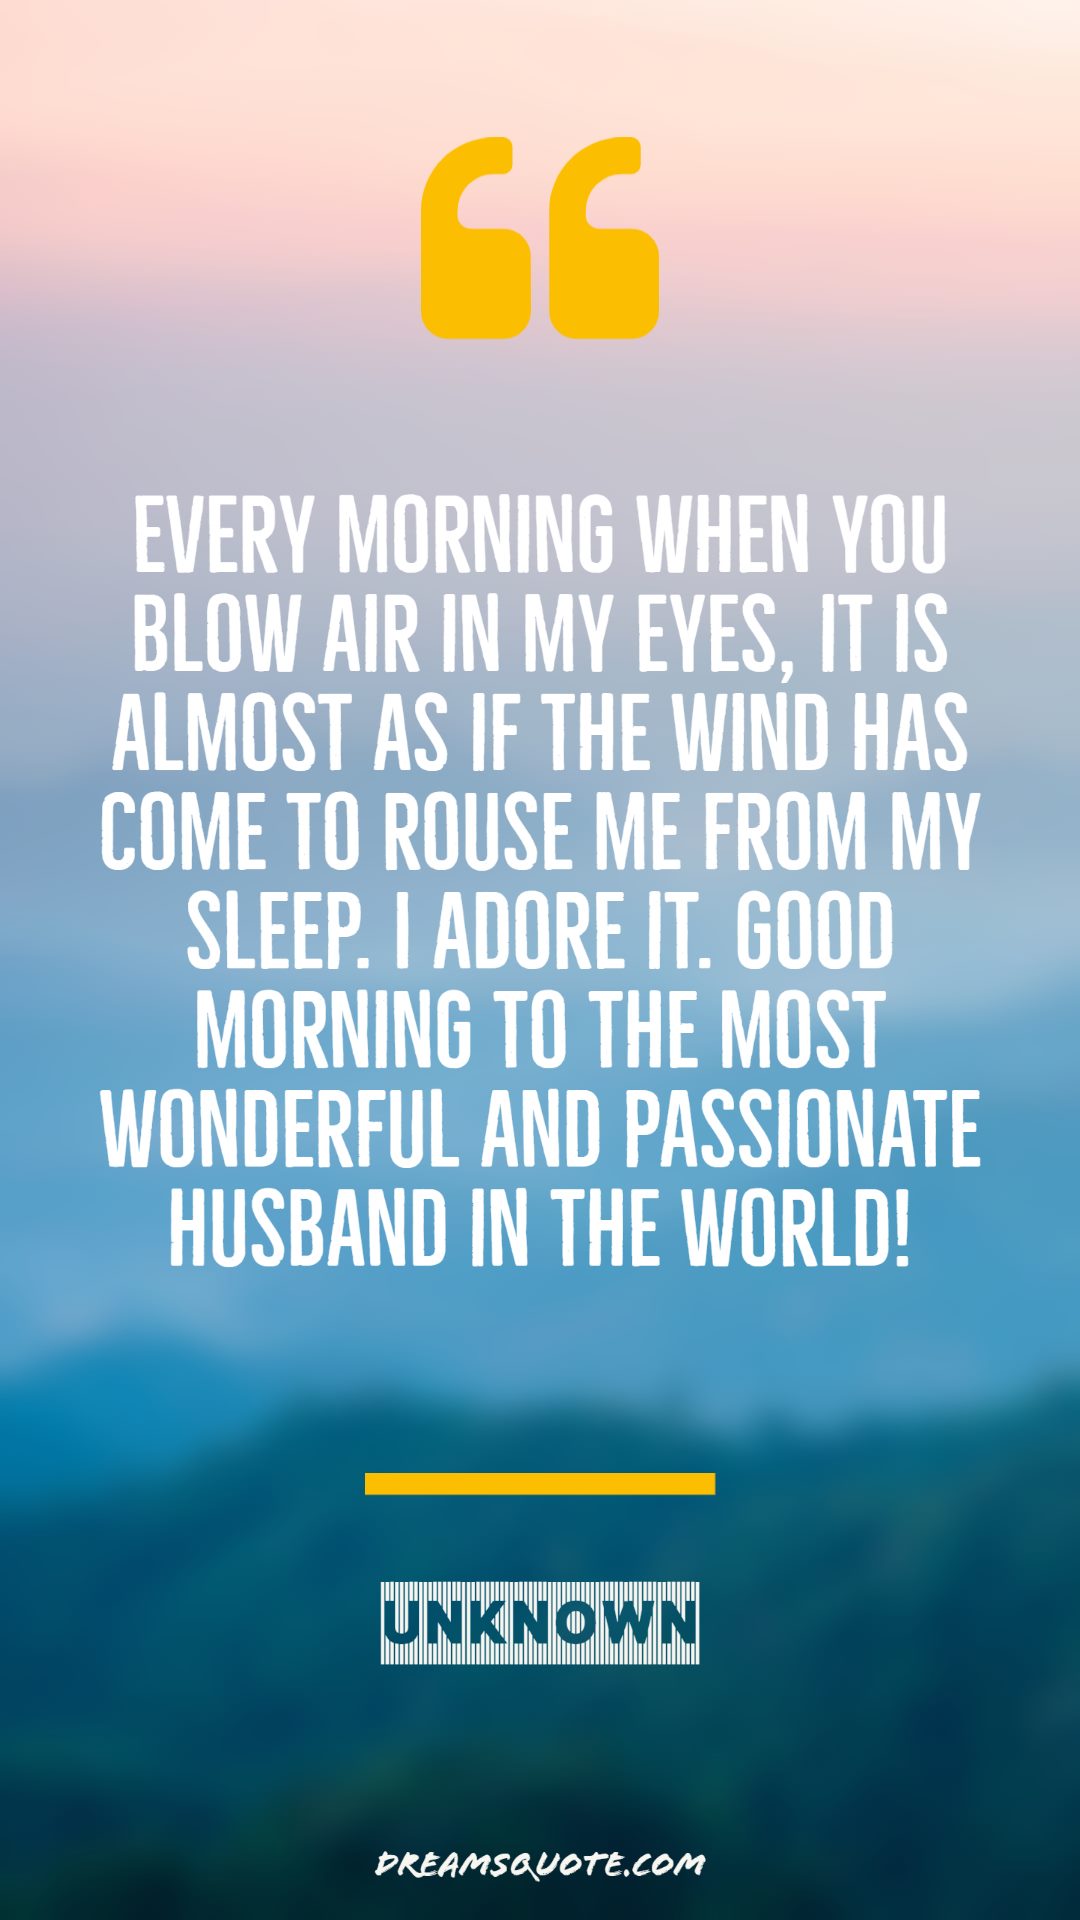 good morning messages for husband with quotes